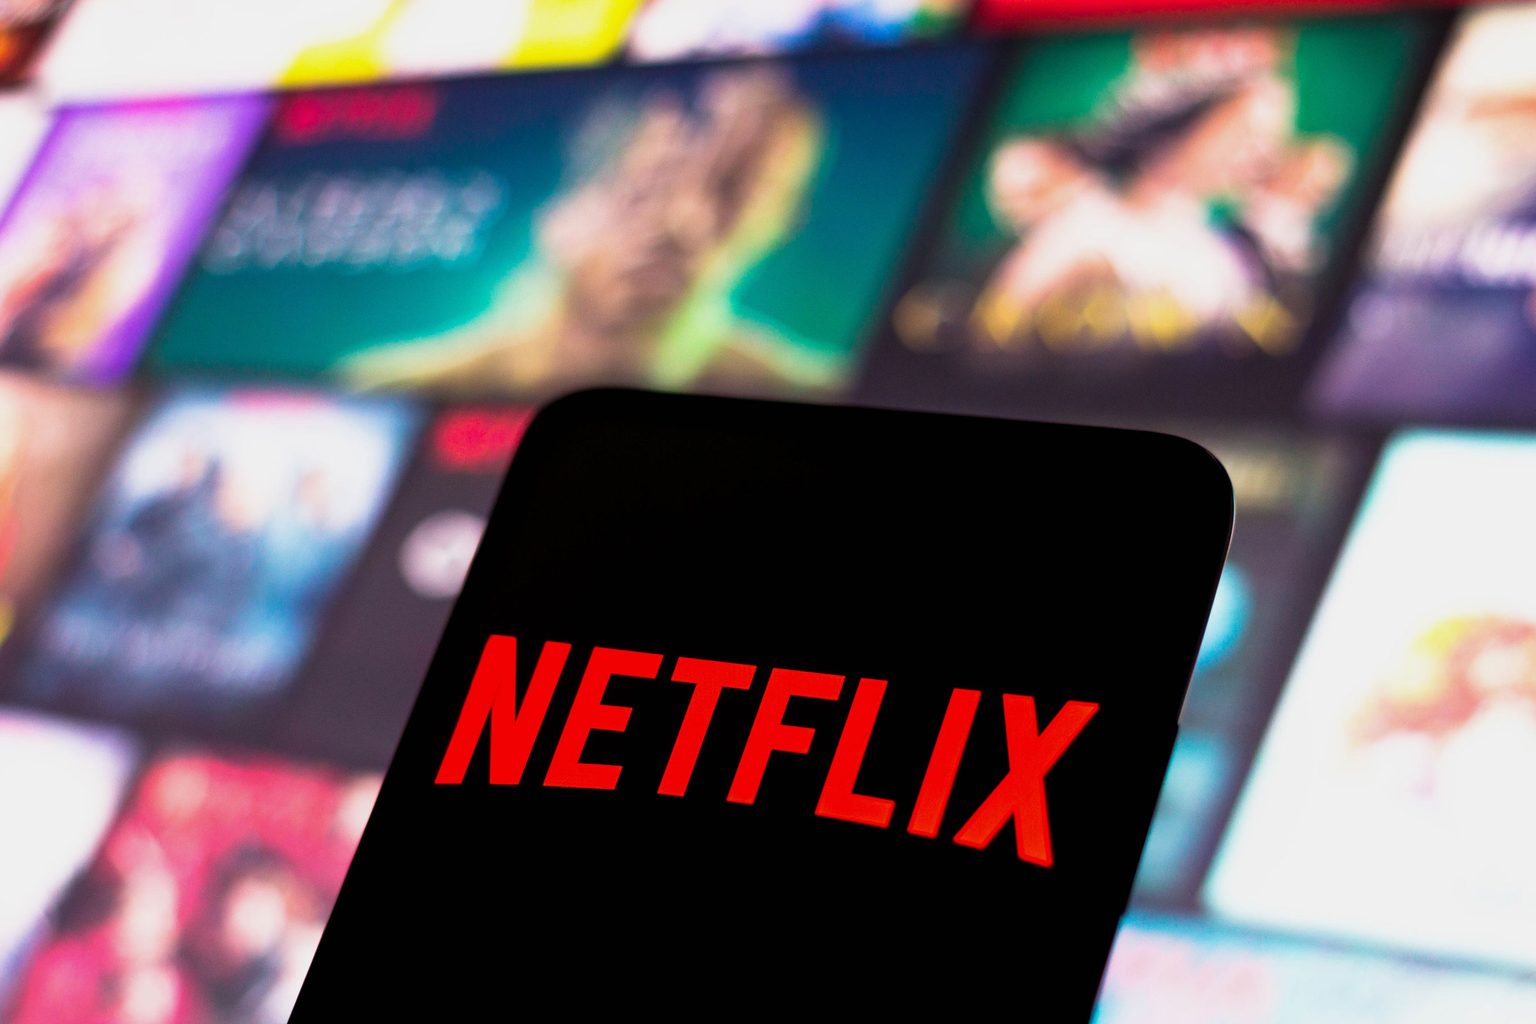 Netflix with Ads Everything You Need to Know About Netflix's Commercials